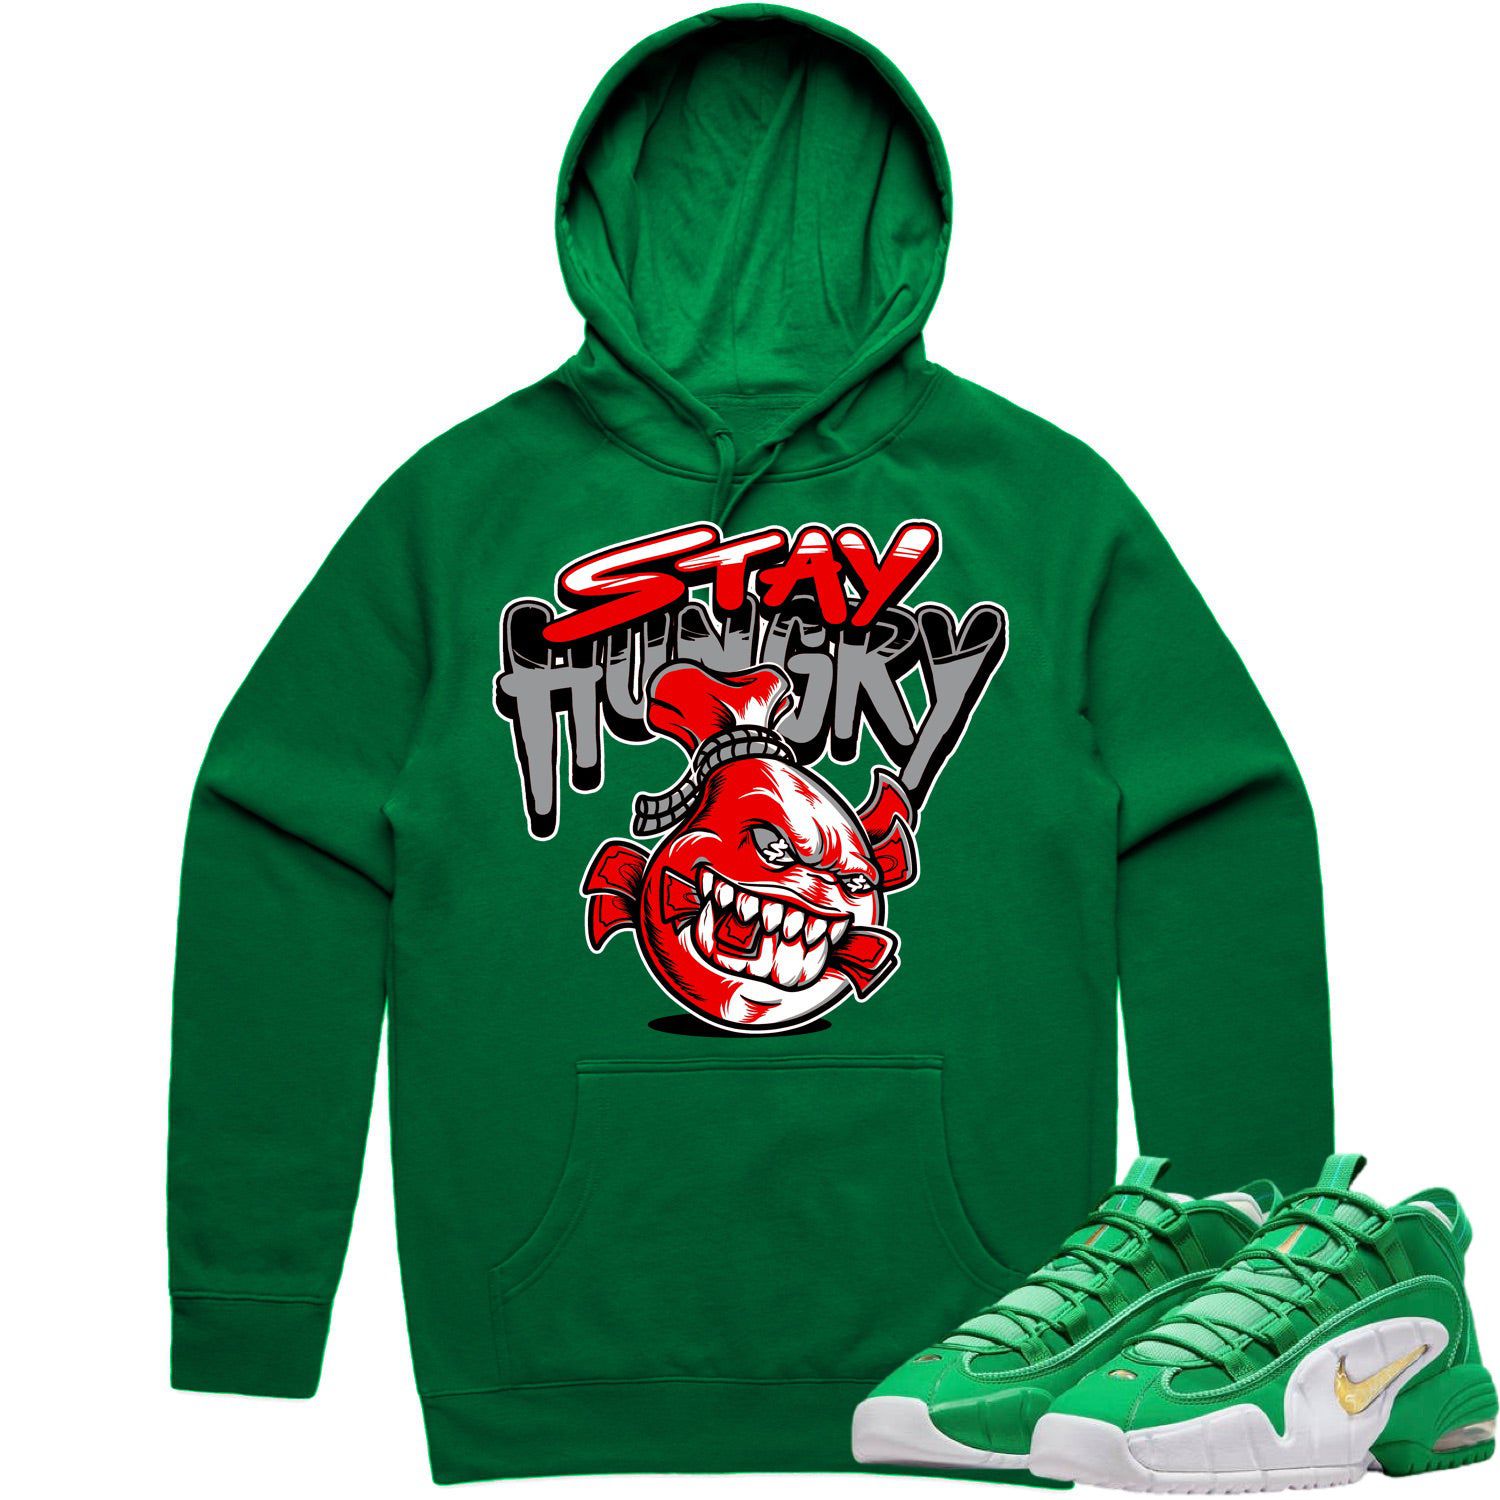 Penny 1 Stadium Green Hoodie - Penny 1s Hoodie - Stay Hungry